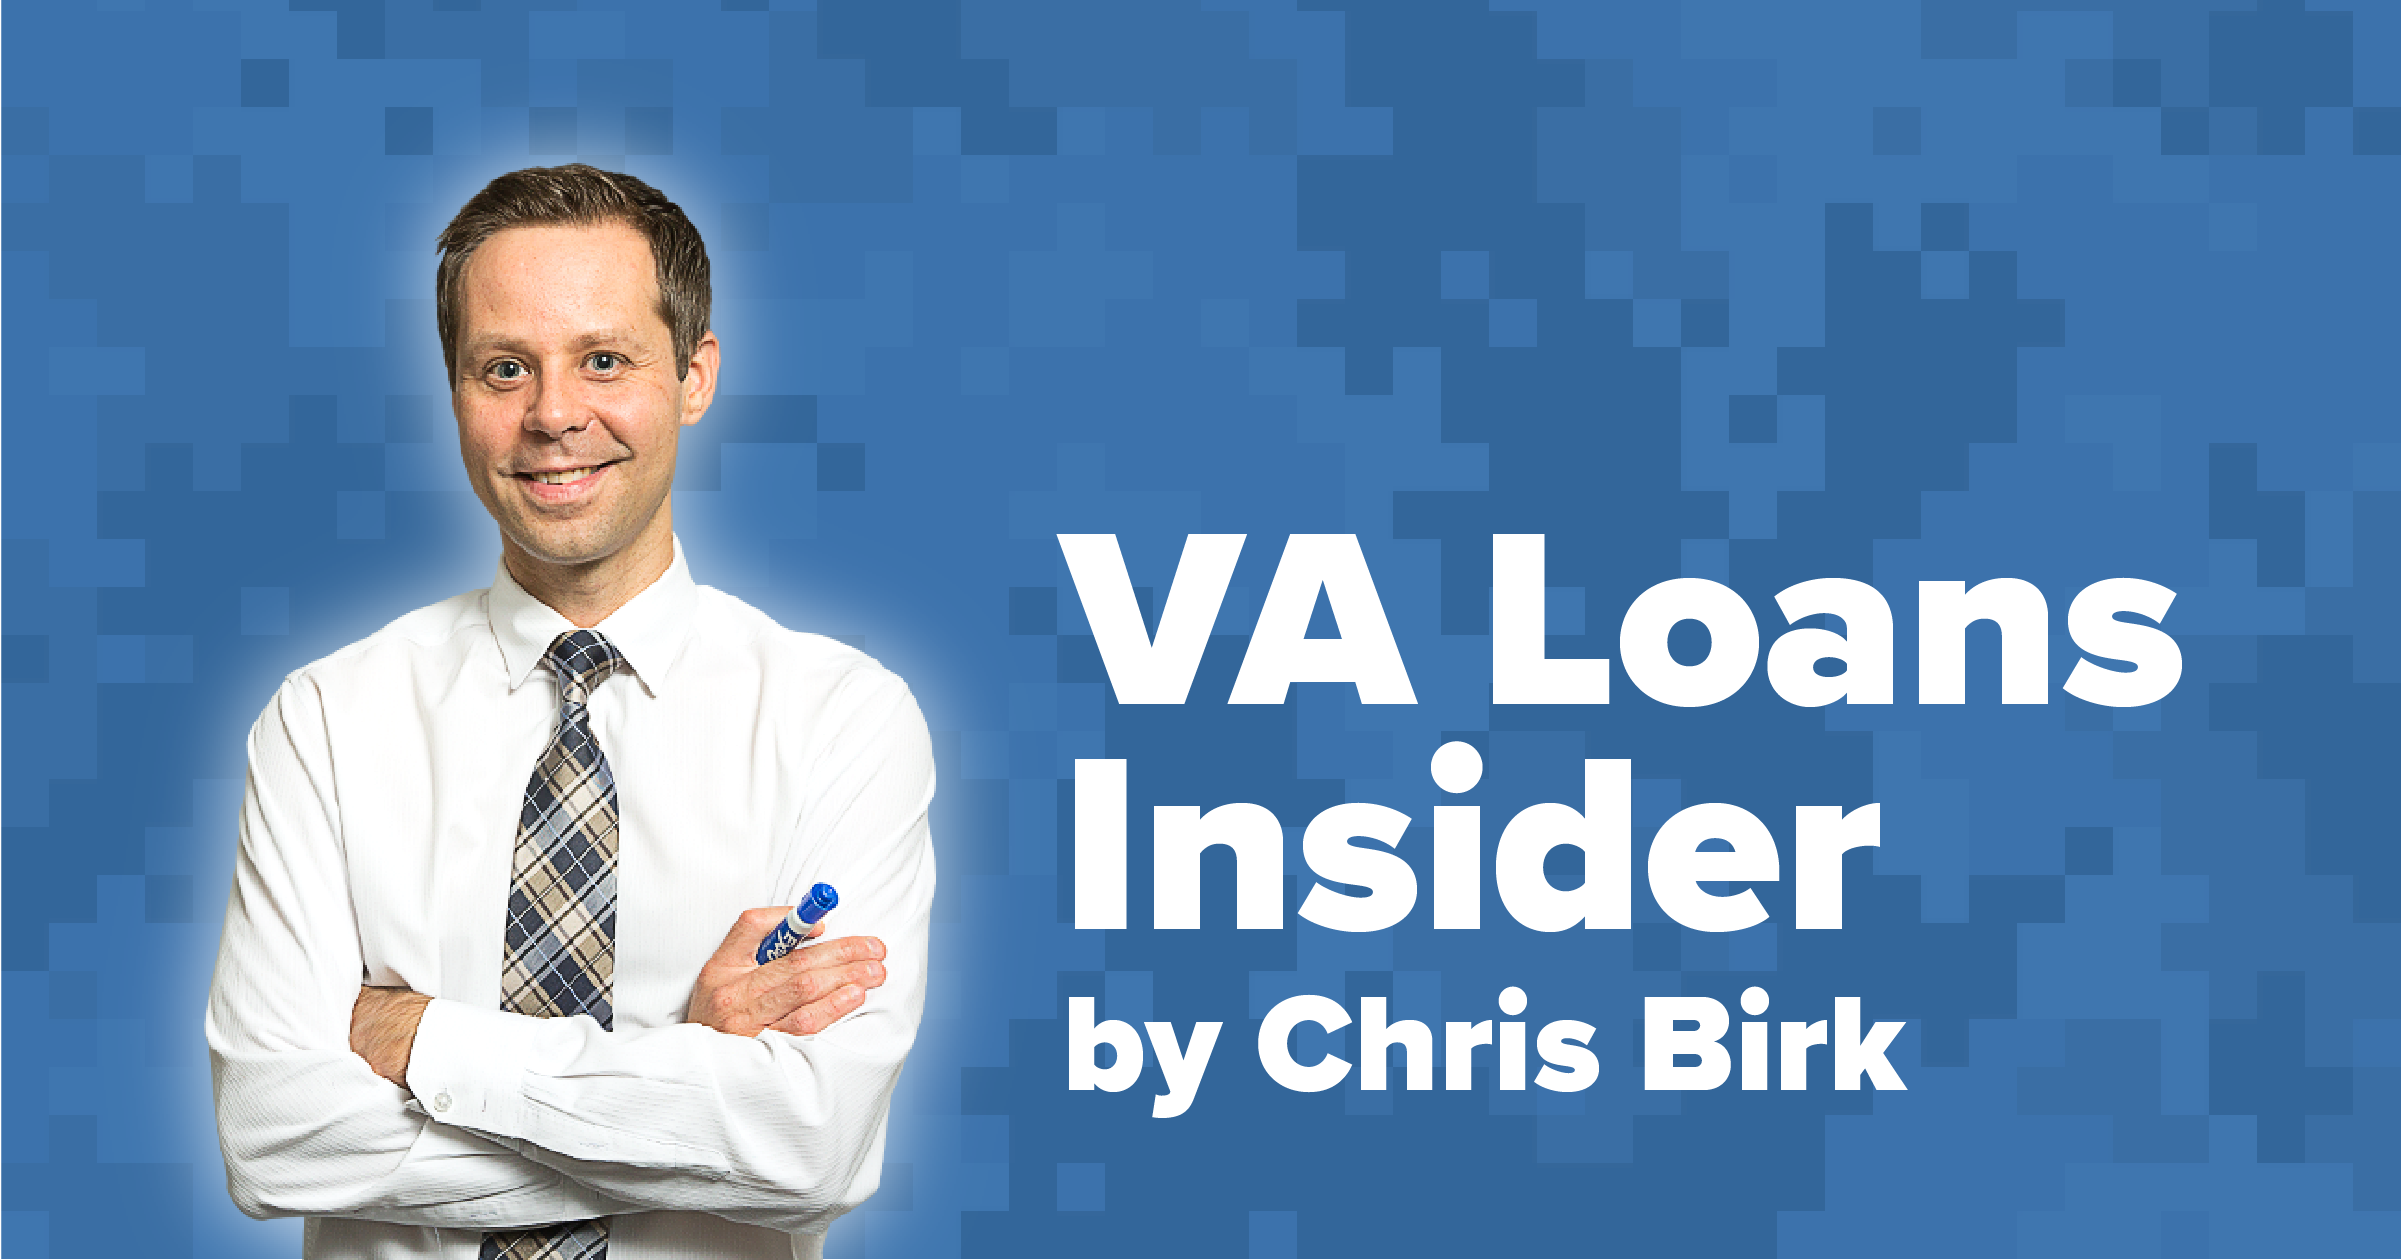 VA Construction Loans: How to Build a Home with a VA Loan